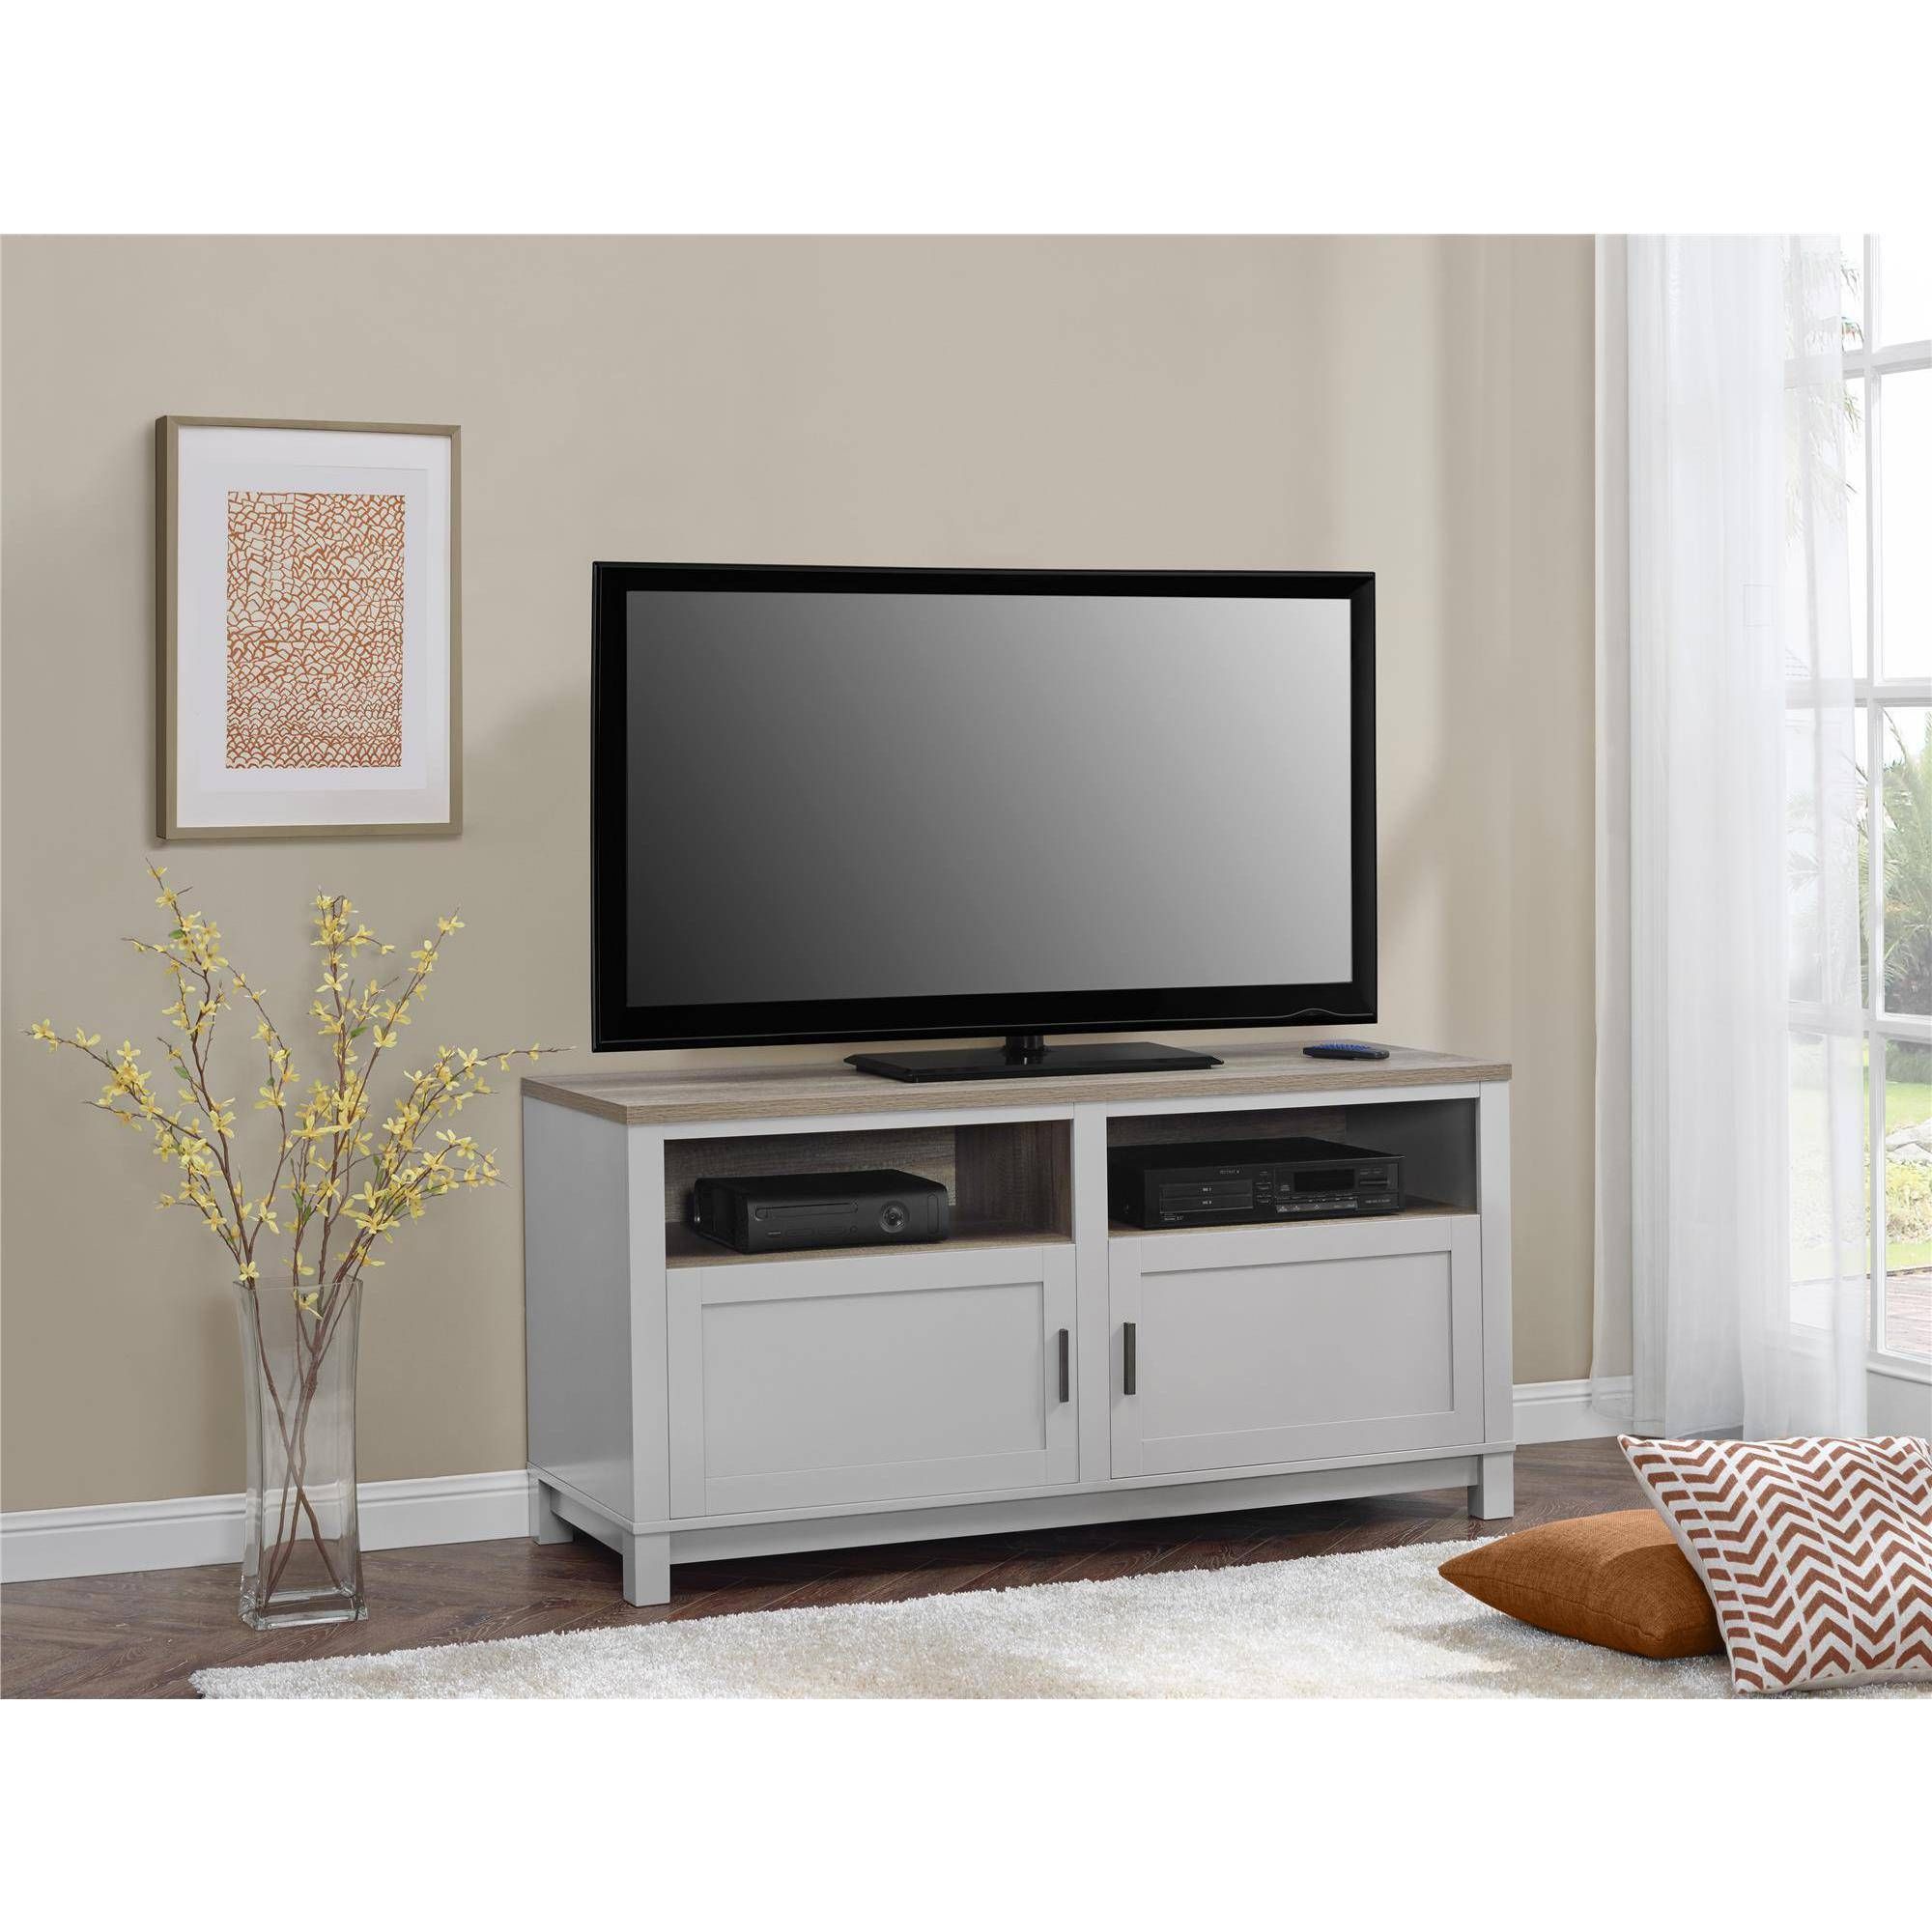 Better Homes And Gardens Langley Bay Tv Stand For Tvs Up To 60 Regarding Cabinet Tv Stands (View 7 of 15)